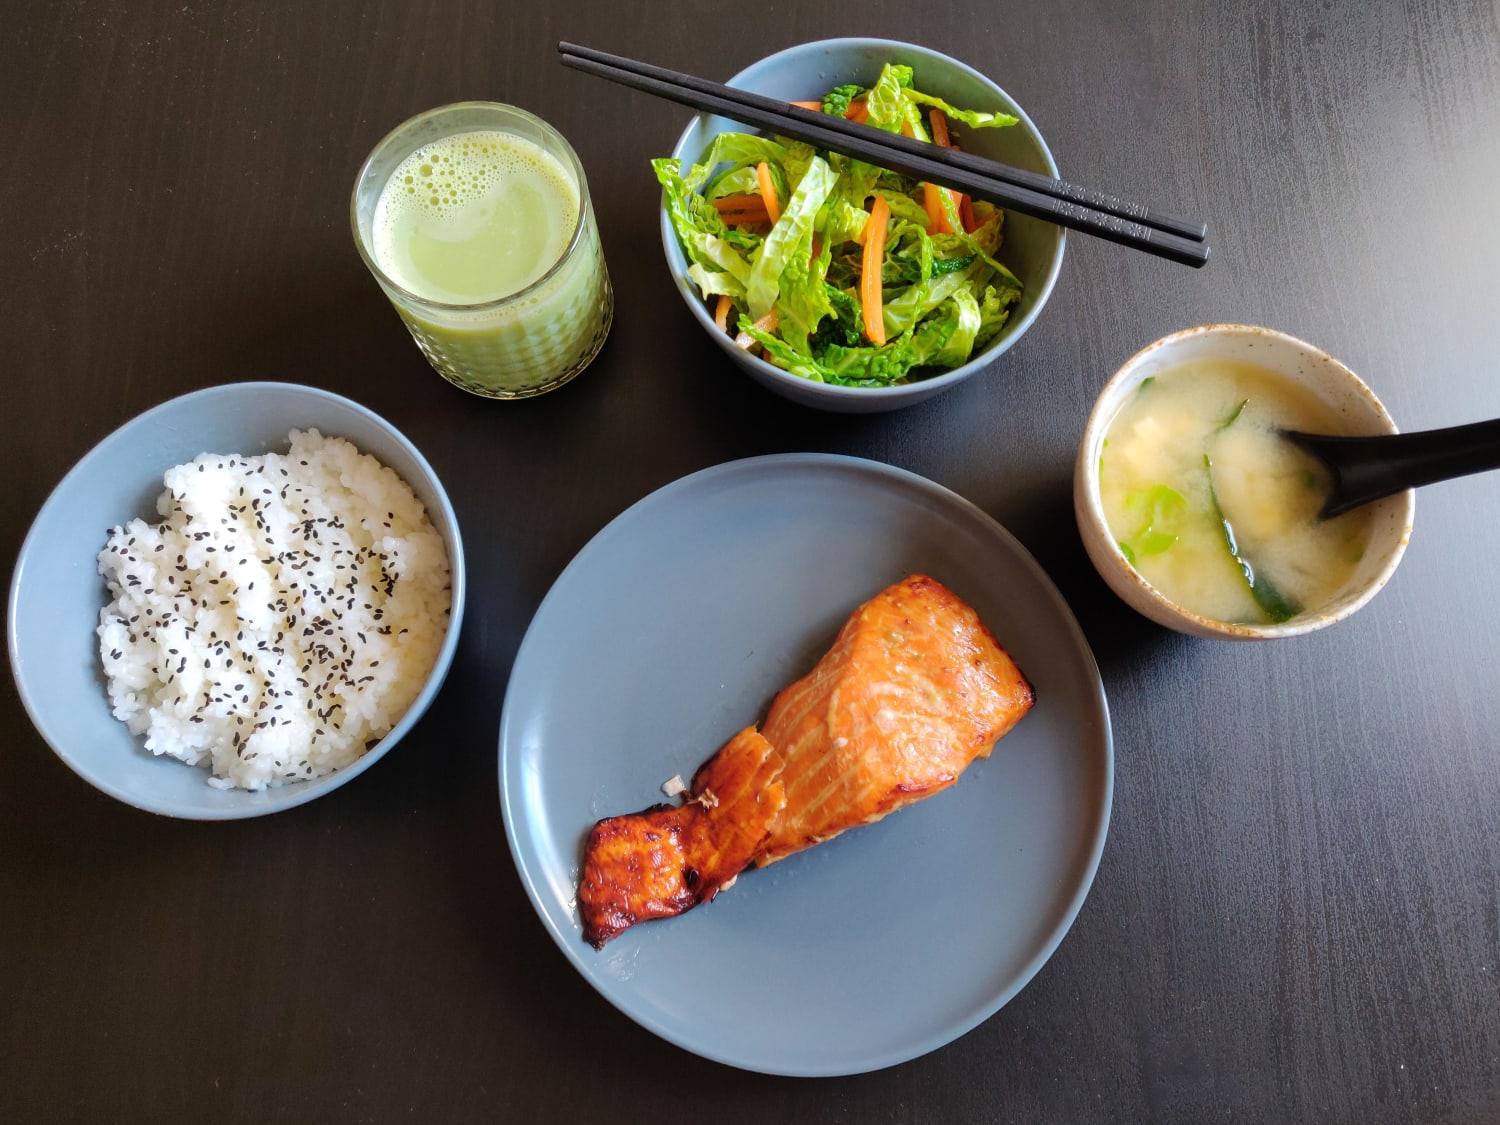 Japanese Breakfast - Baked Salmon, Rice, Miso Soup, Shredded Carrot and Cabbage Salad and Iced Matcha